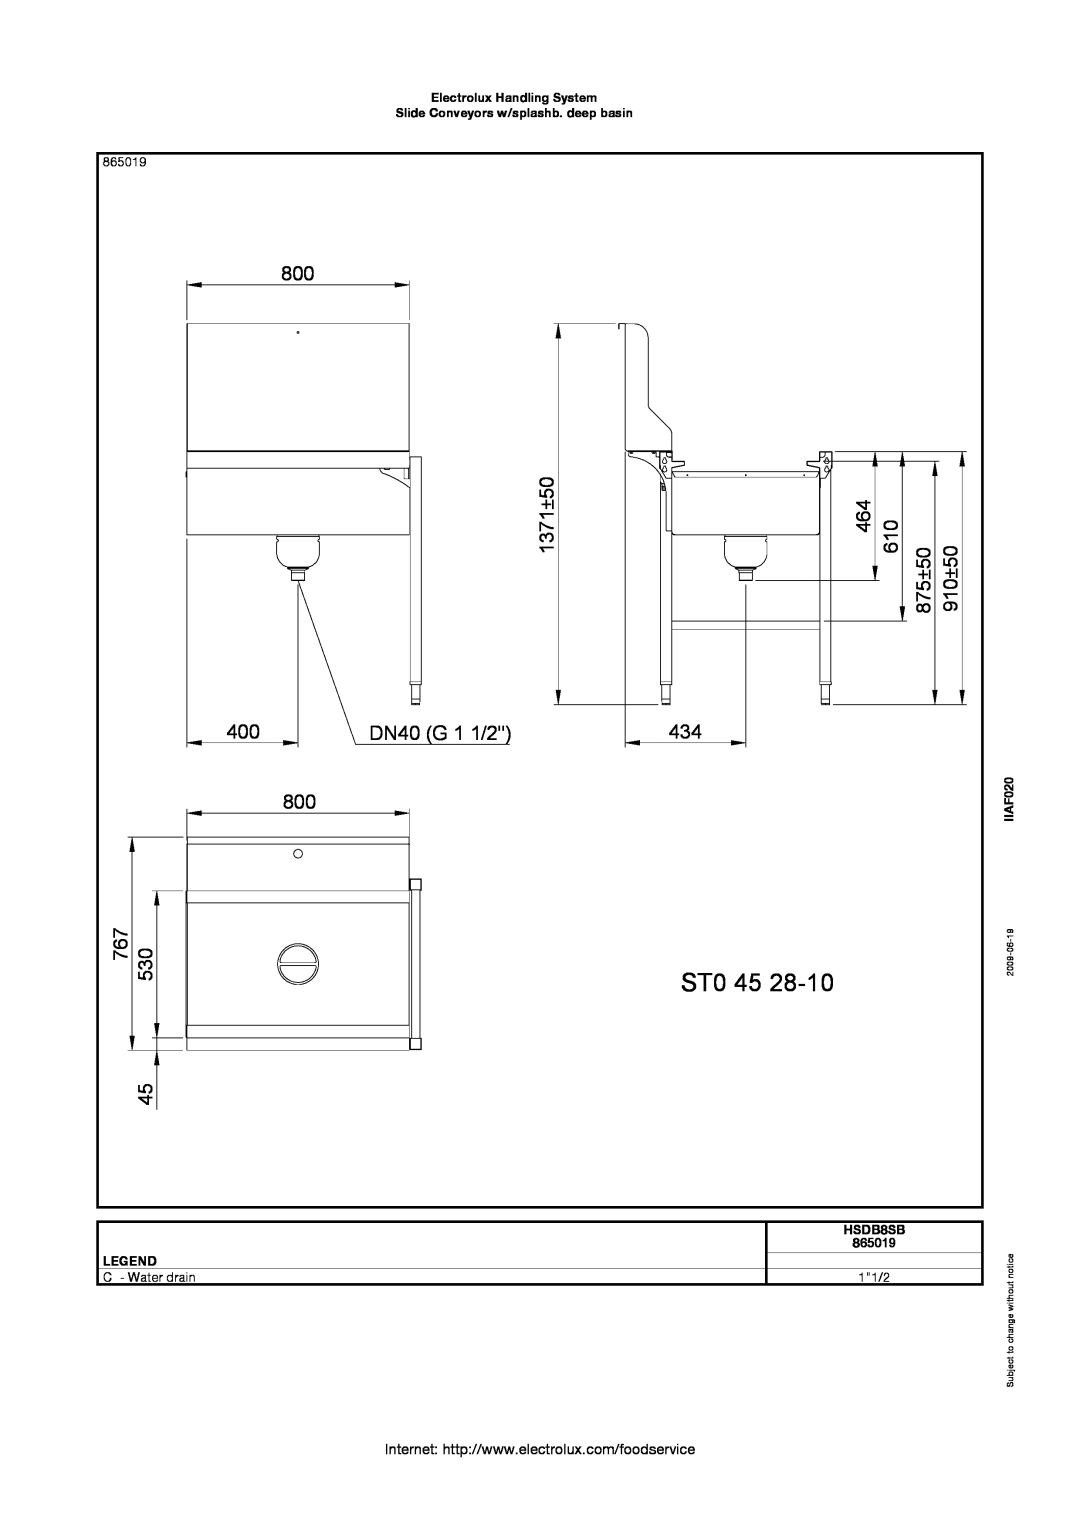 Electrolux SS-6 manual ST0, 865019, C - Water drain 